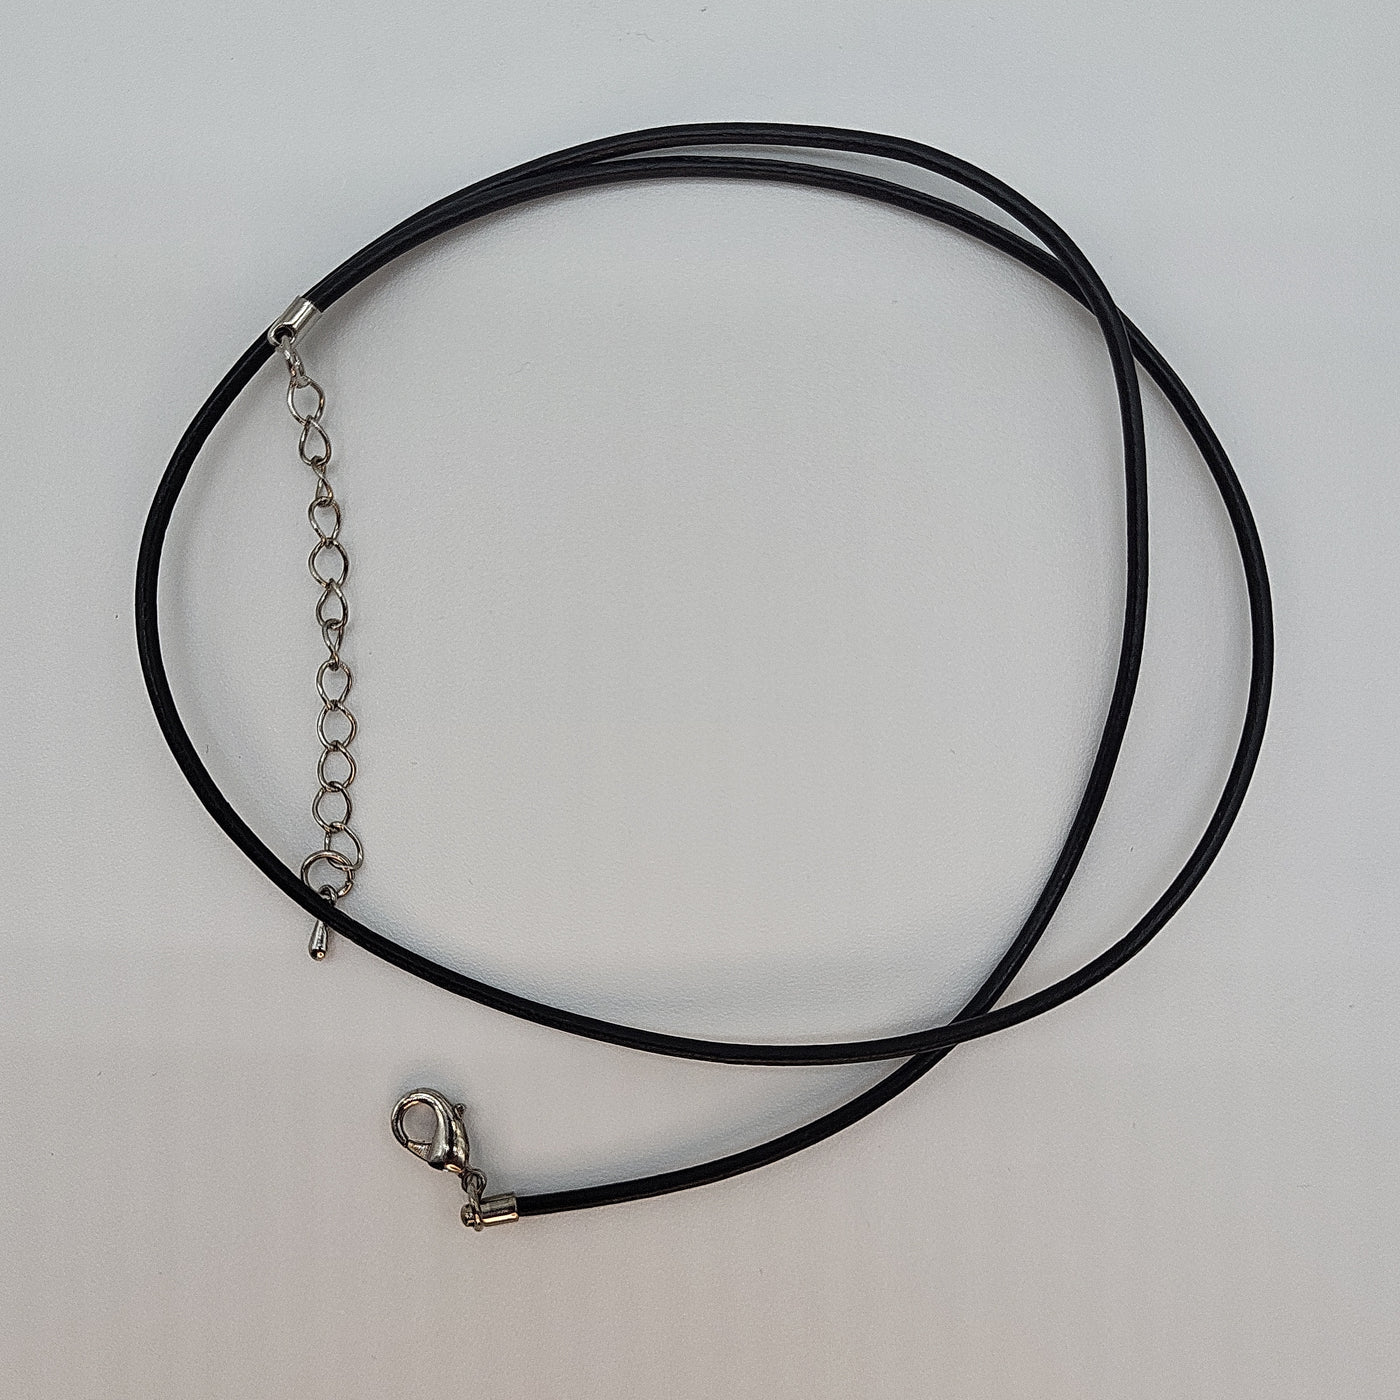 Necklace 20" Leather Cord